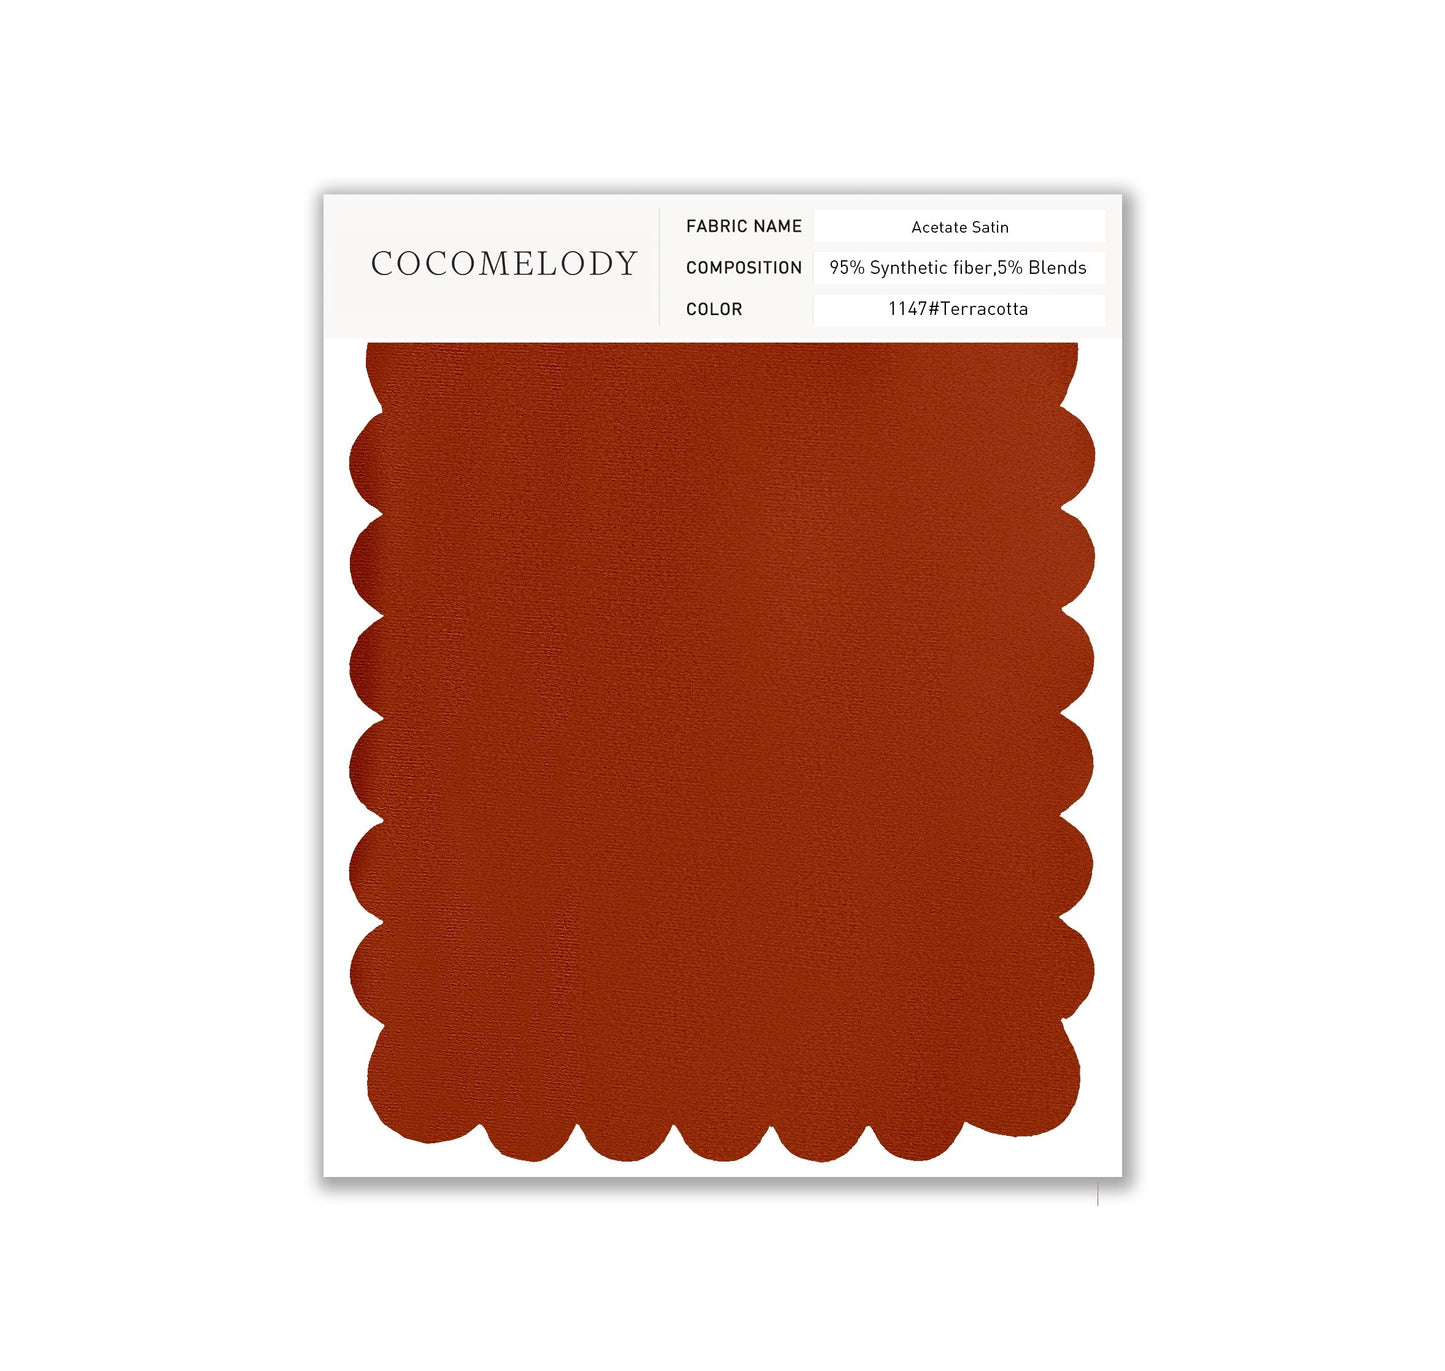 Acetate Satin Fabric Swatch in Single Color